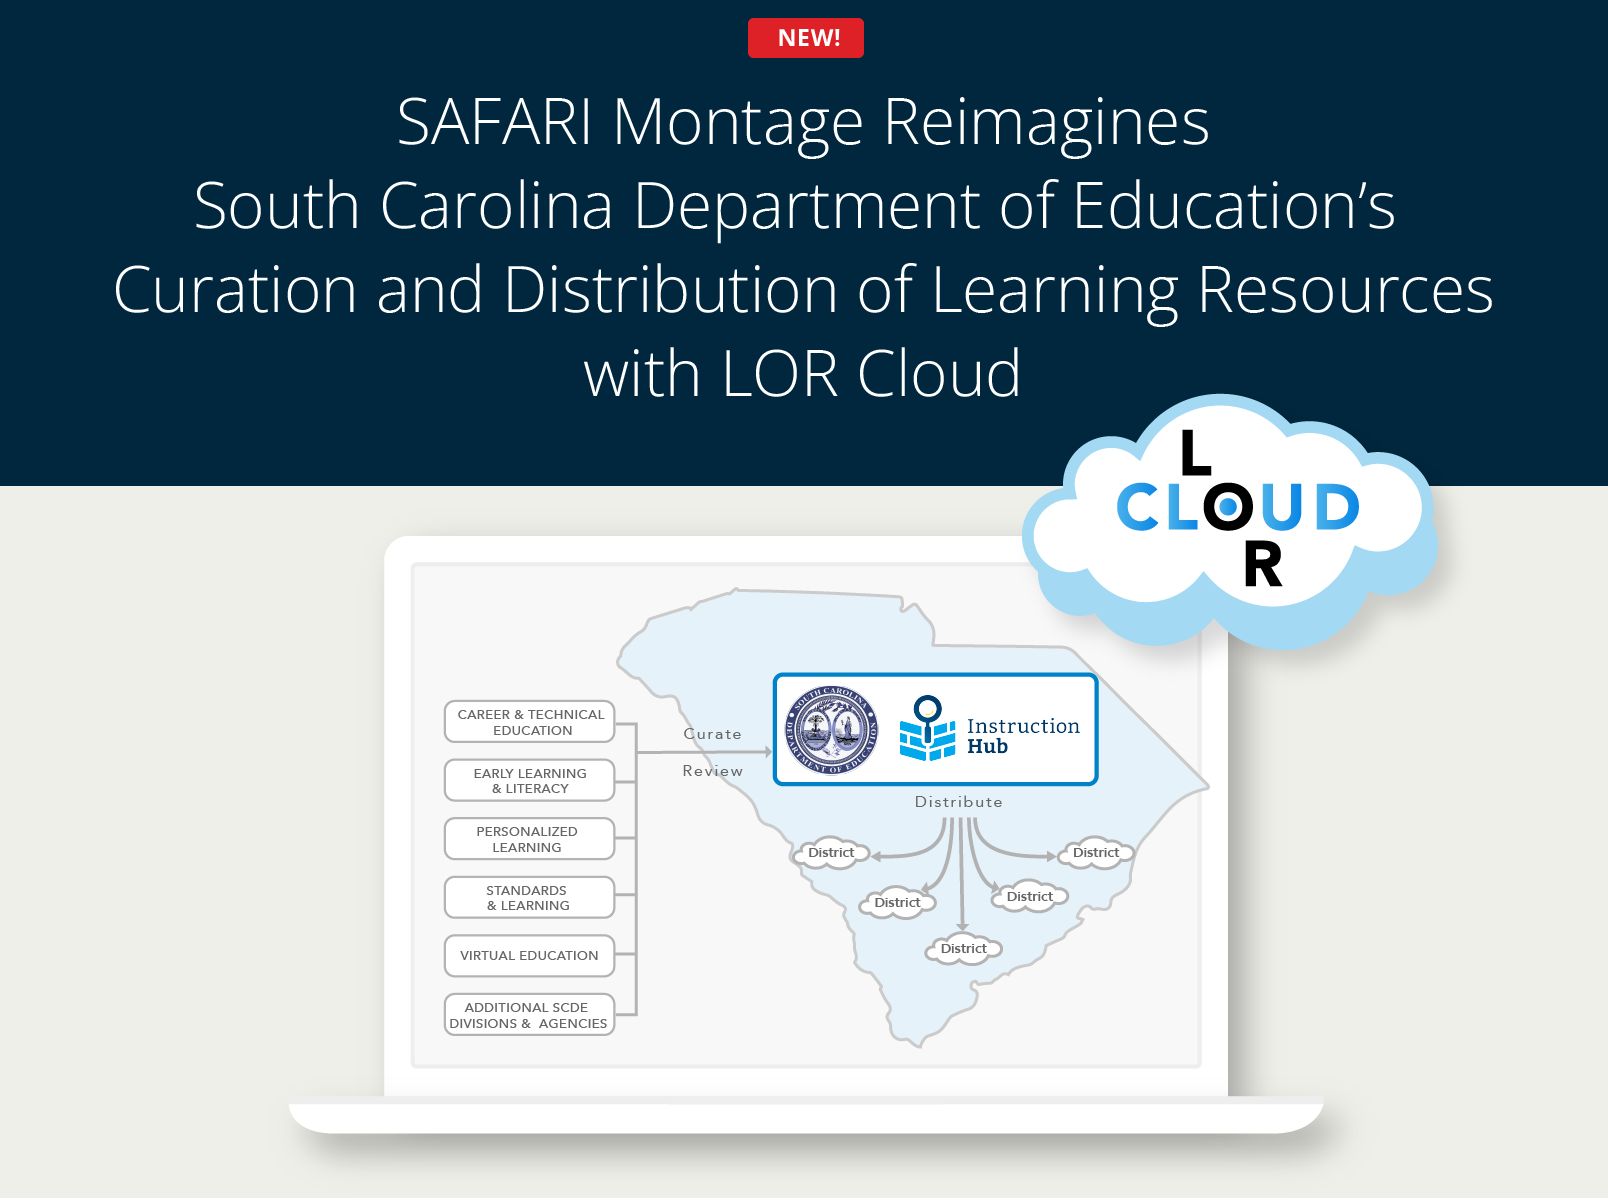 SAFARI Montage Reimagines South Carolina Department of Education’s Curation and Distribution of Learning Resources with LOR Cloud
